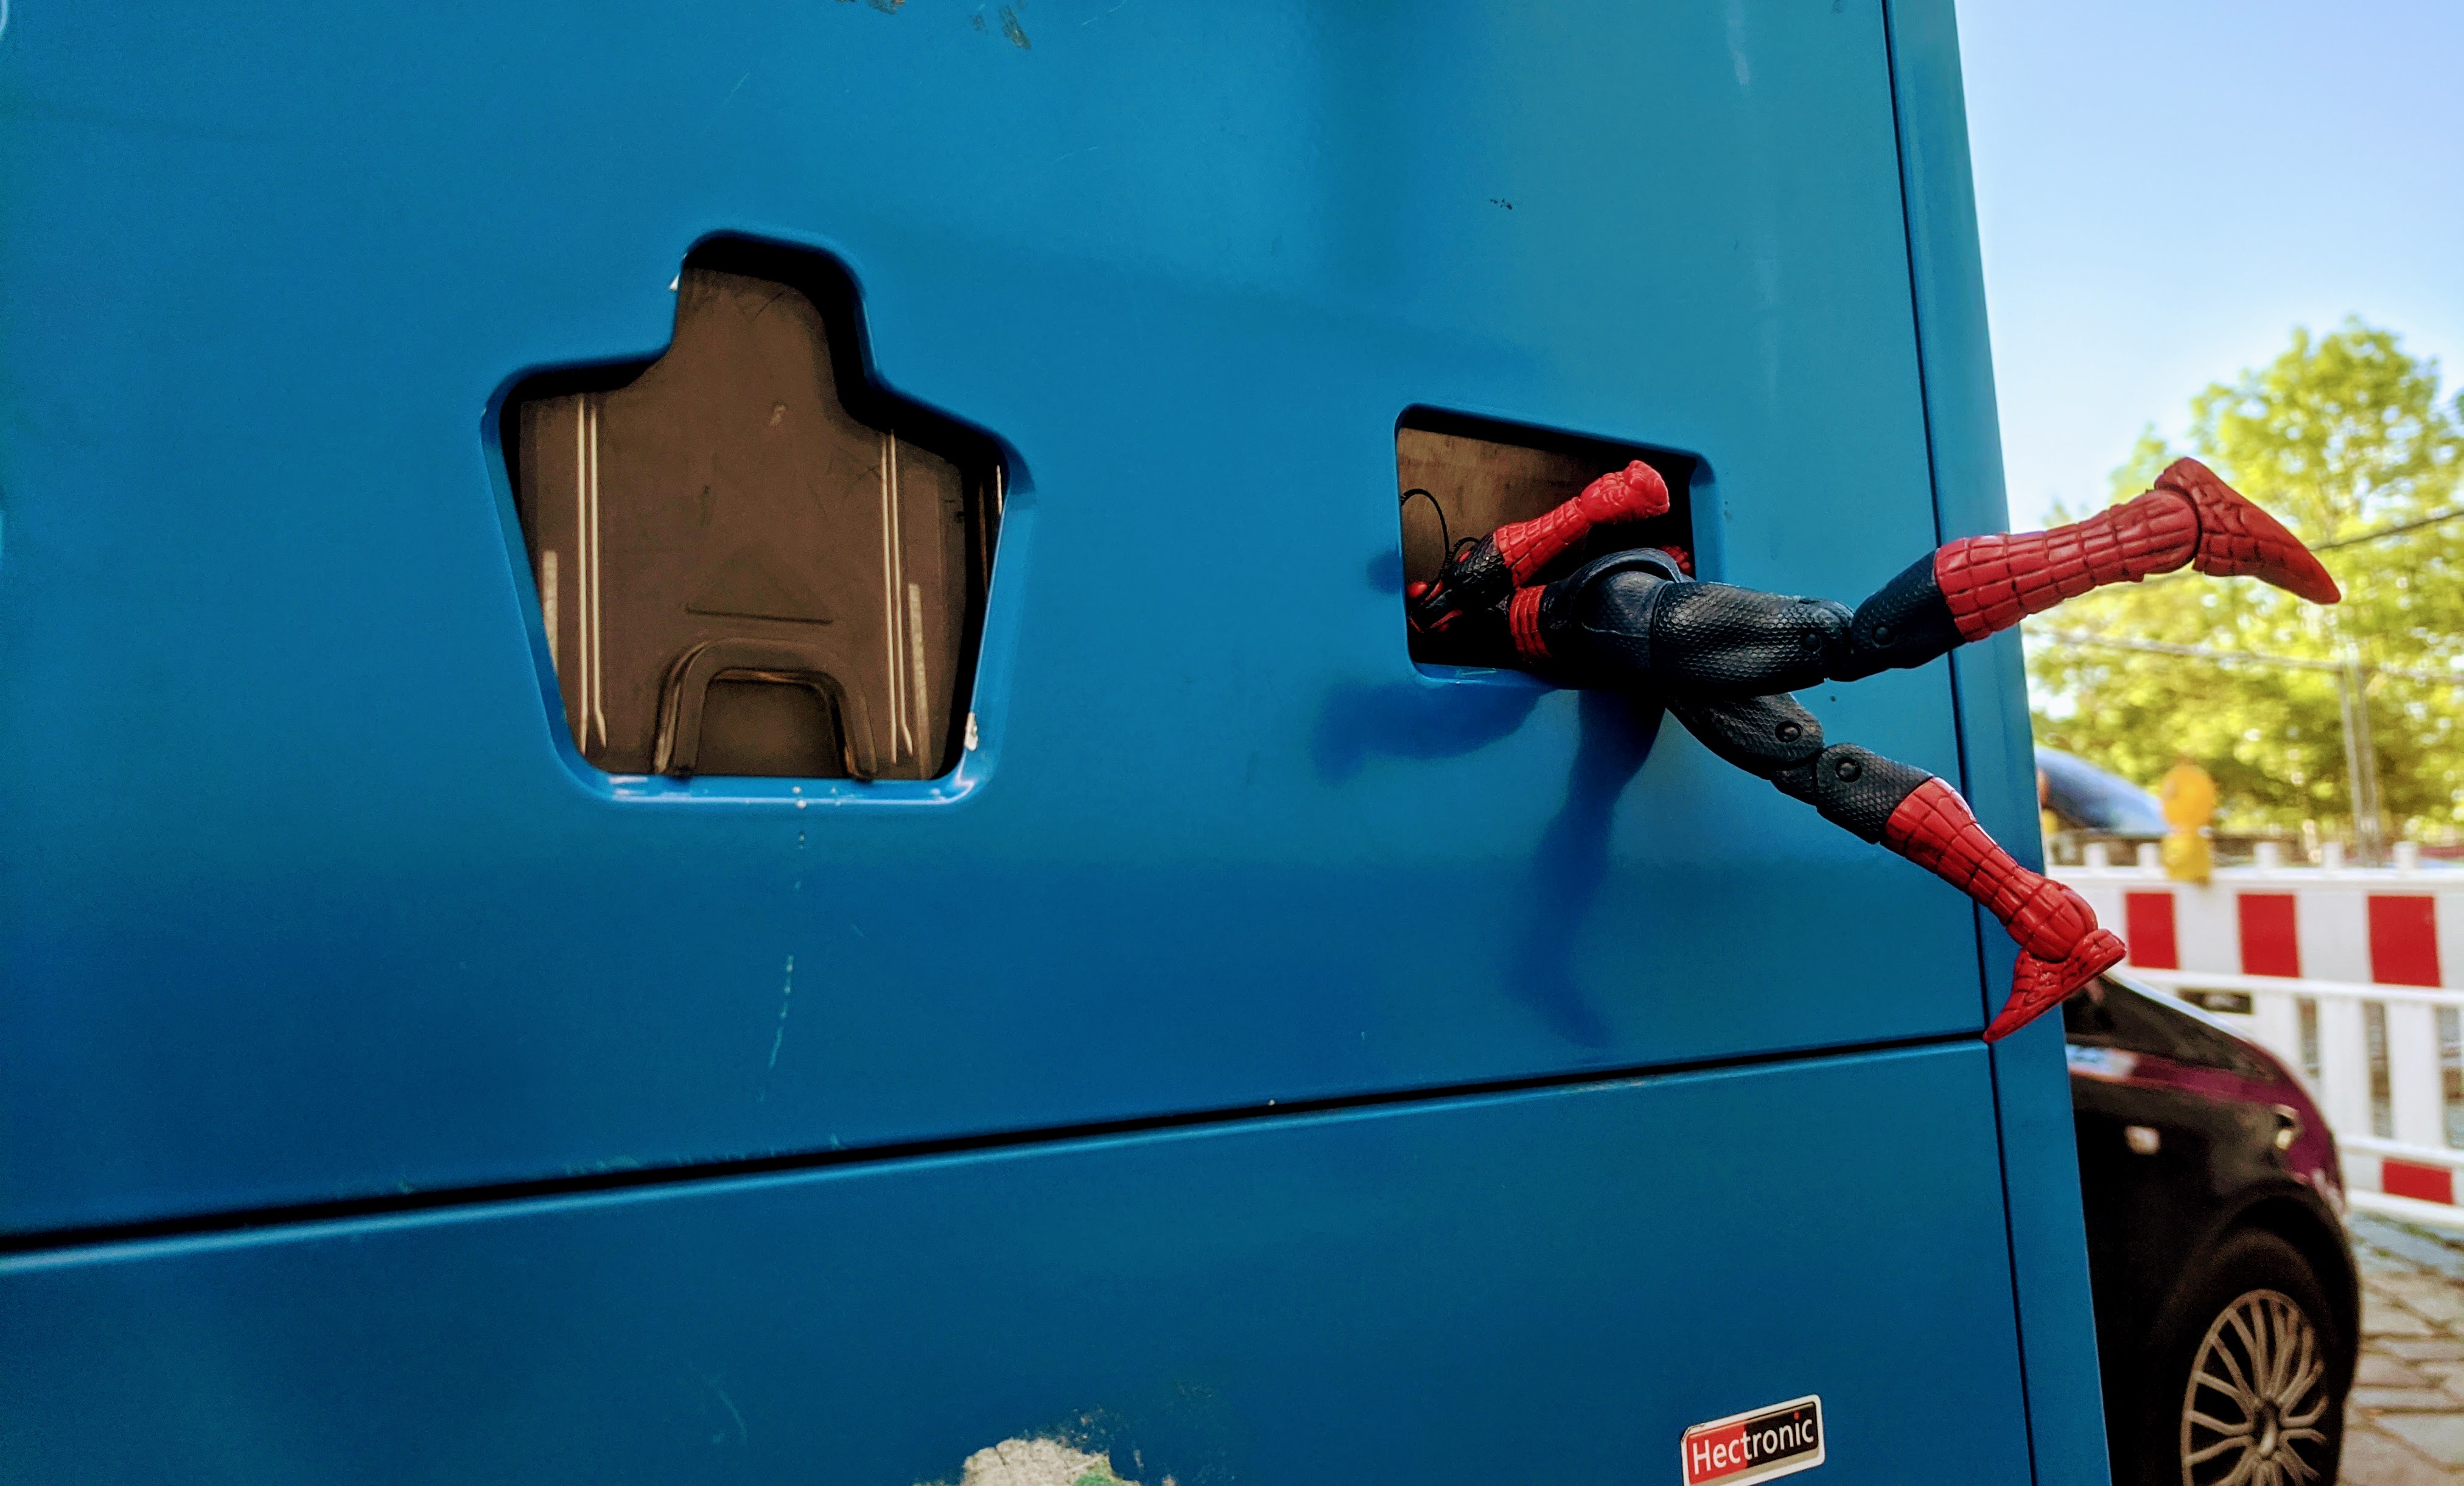 A picture of a Spiderman stuck flailing in a coin return slot. Yes, really.